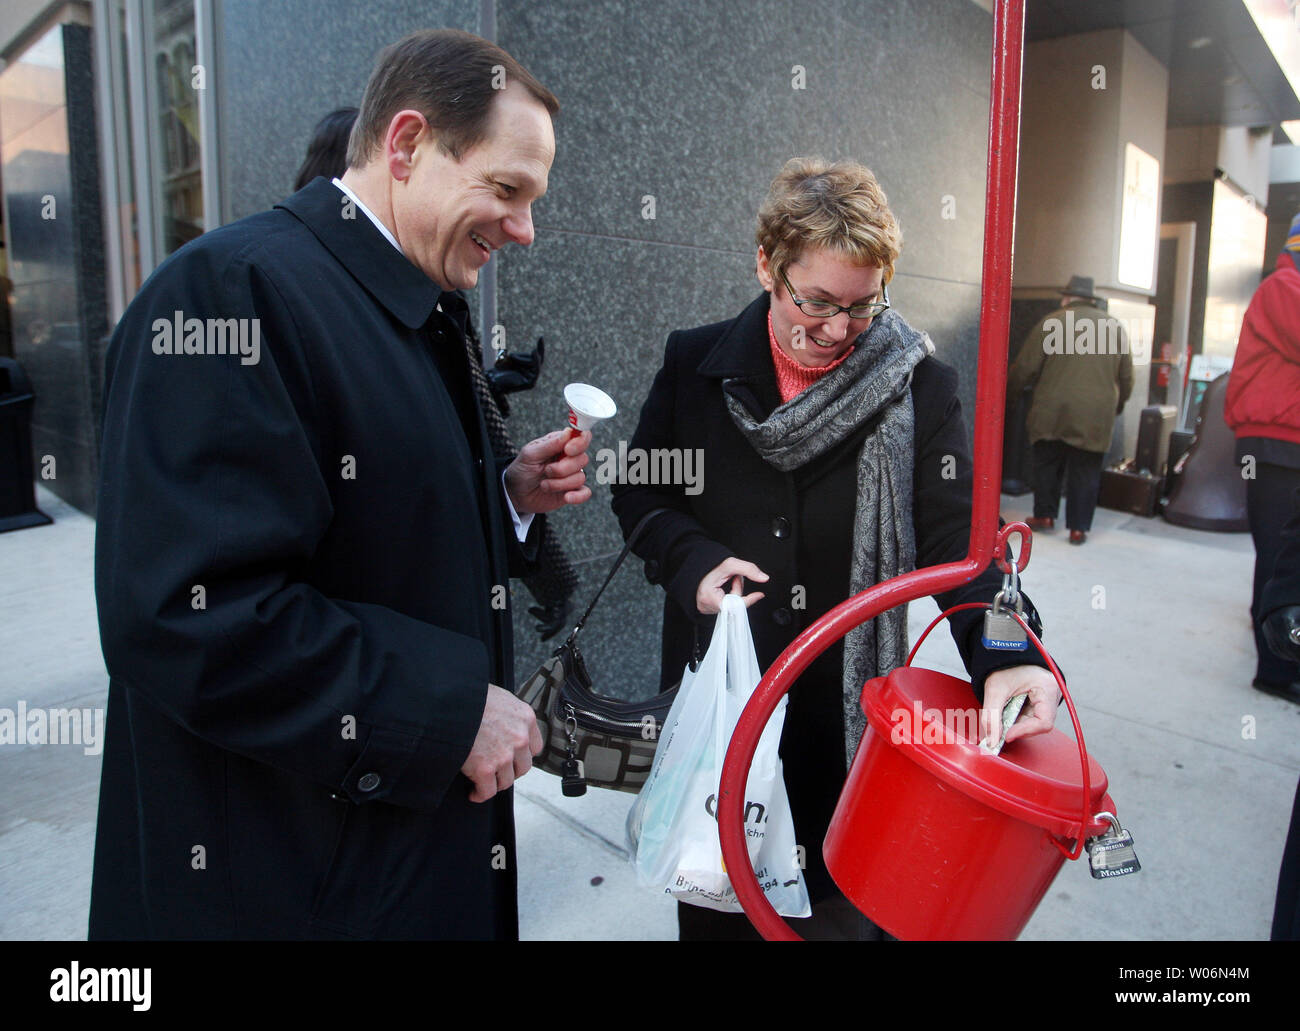 Salvation Army Christmas Kettle Campaign 2010